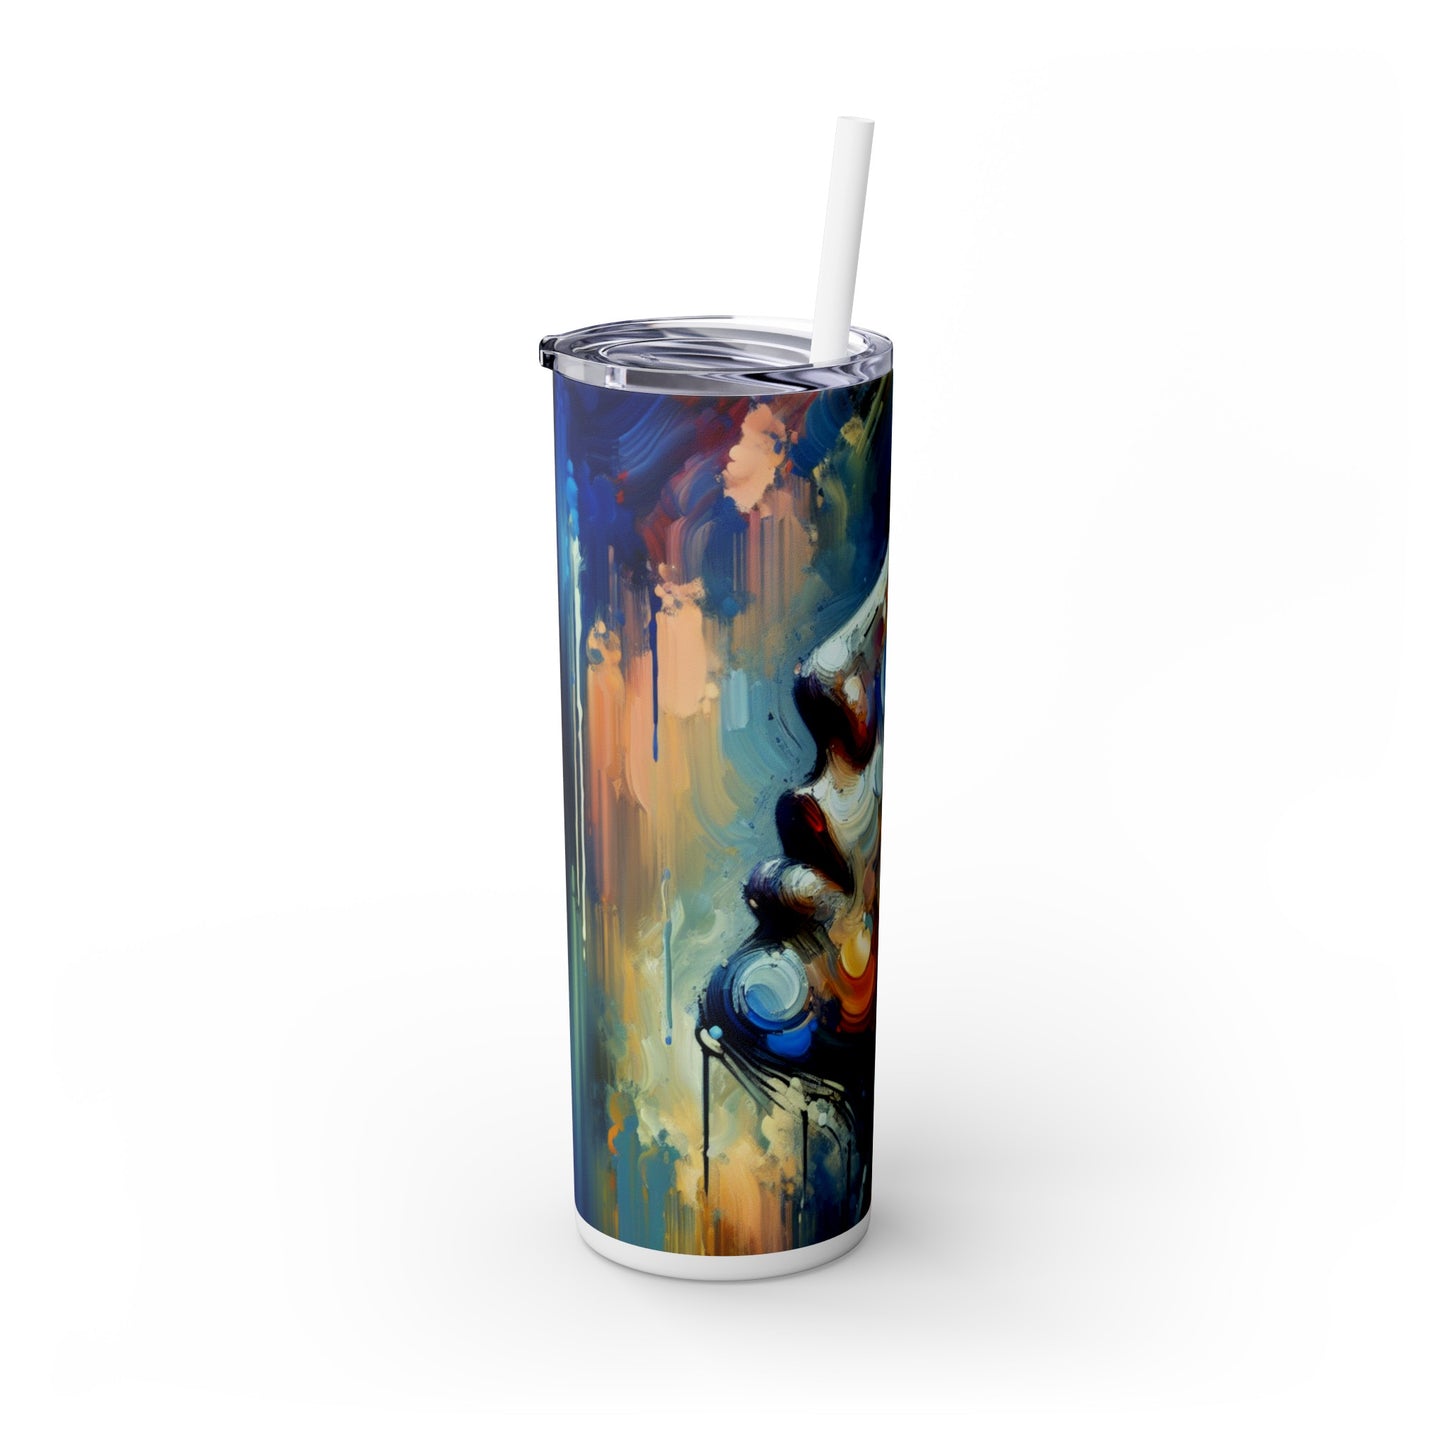 "City Lights: A Neo-Expressionist Ode to Urban Chaos" - The Alien Maars® Skinny Tumbler with Straw 20oz Neo-Expressionism